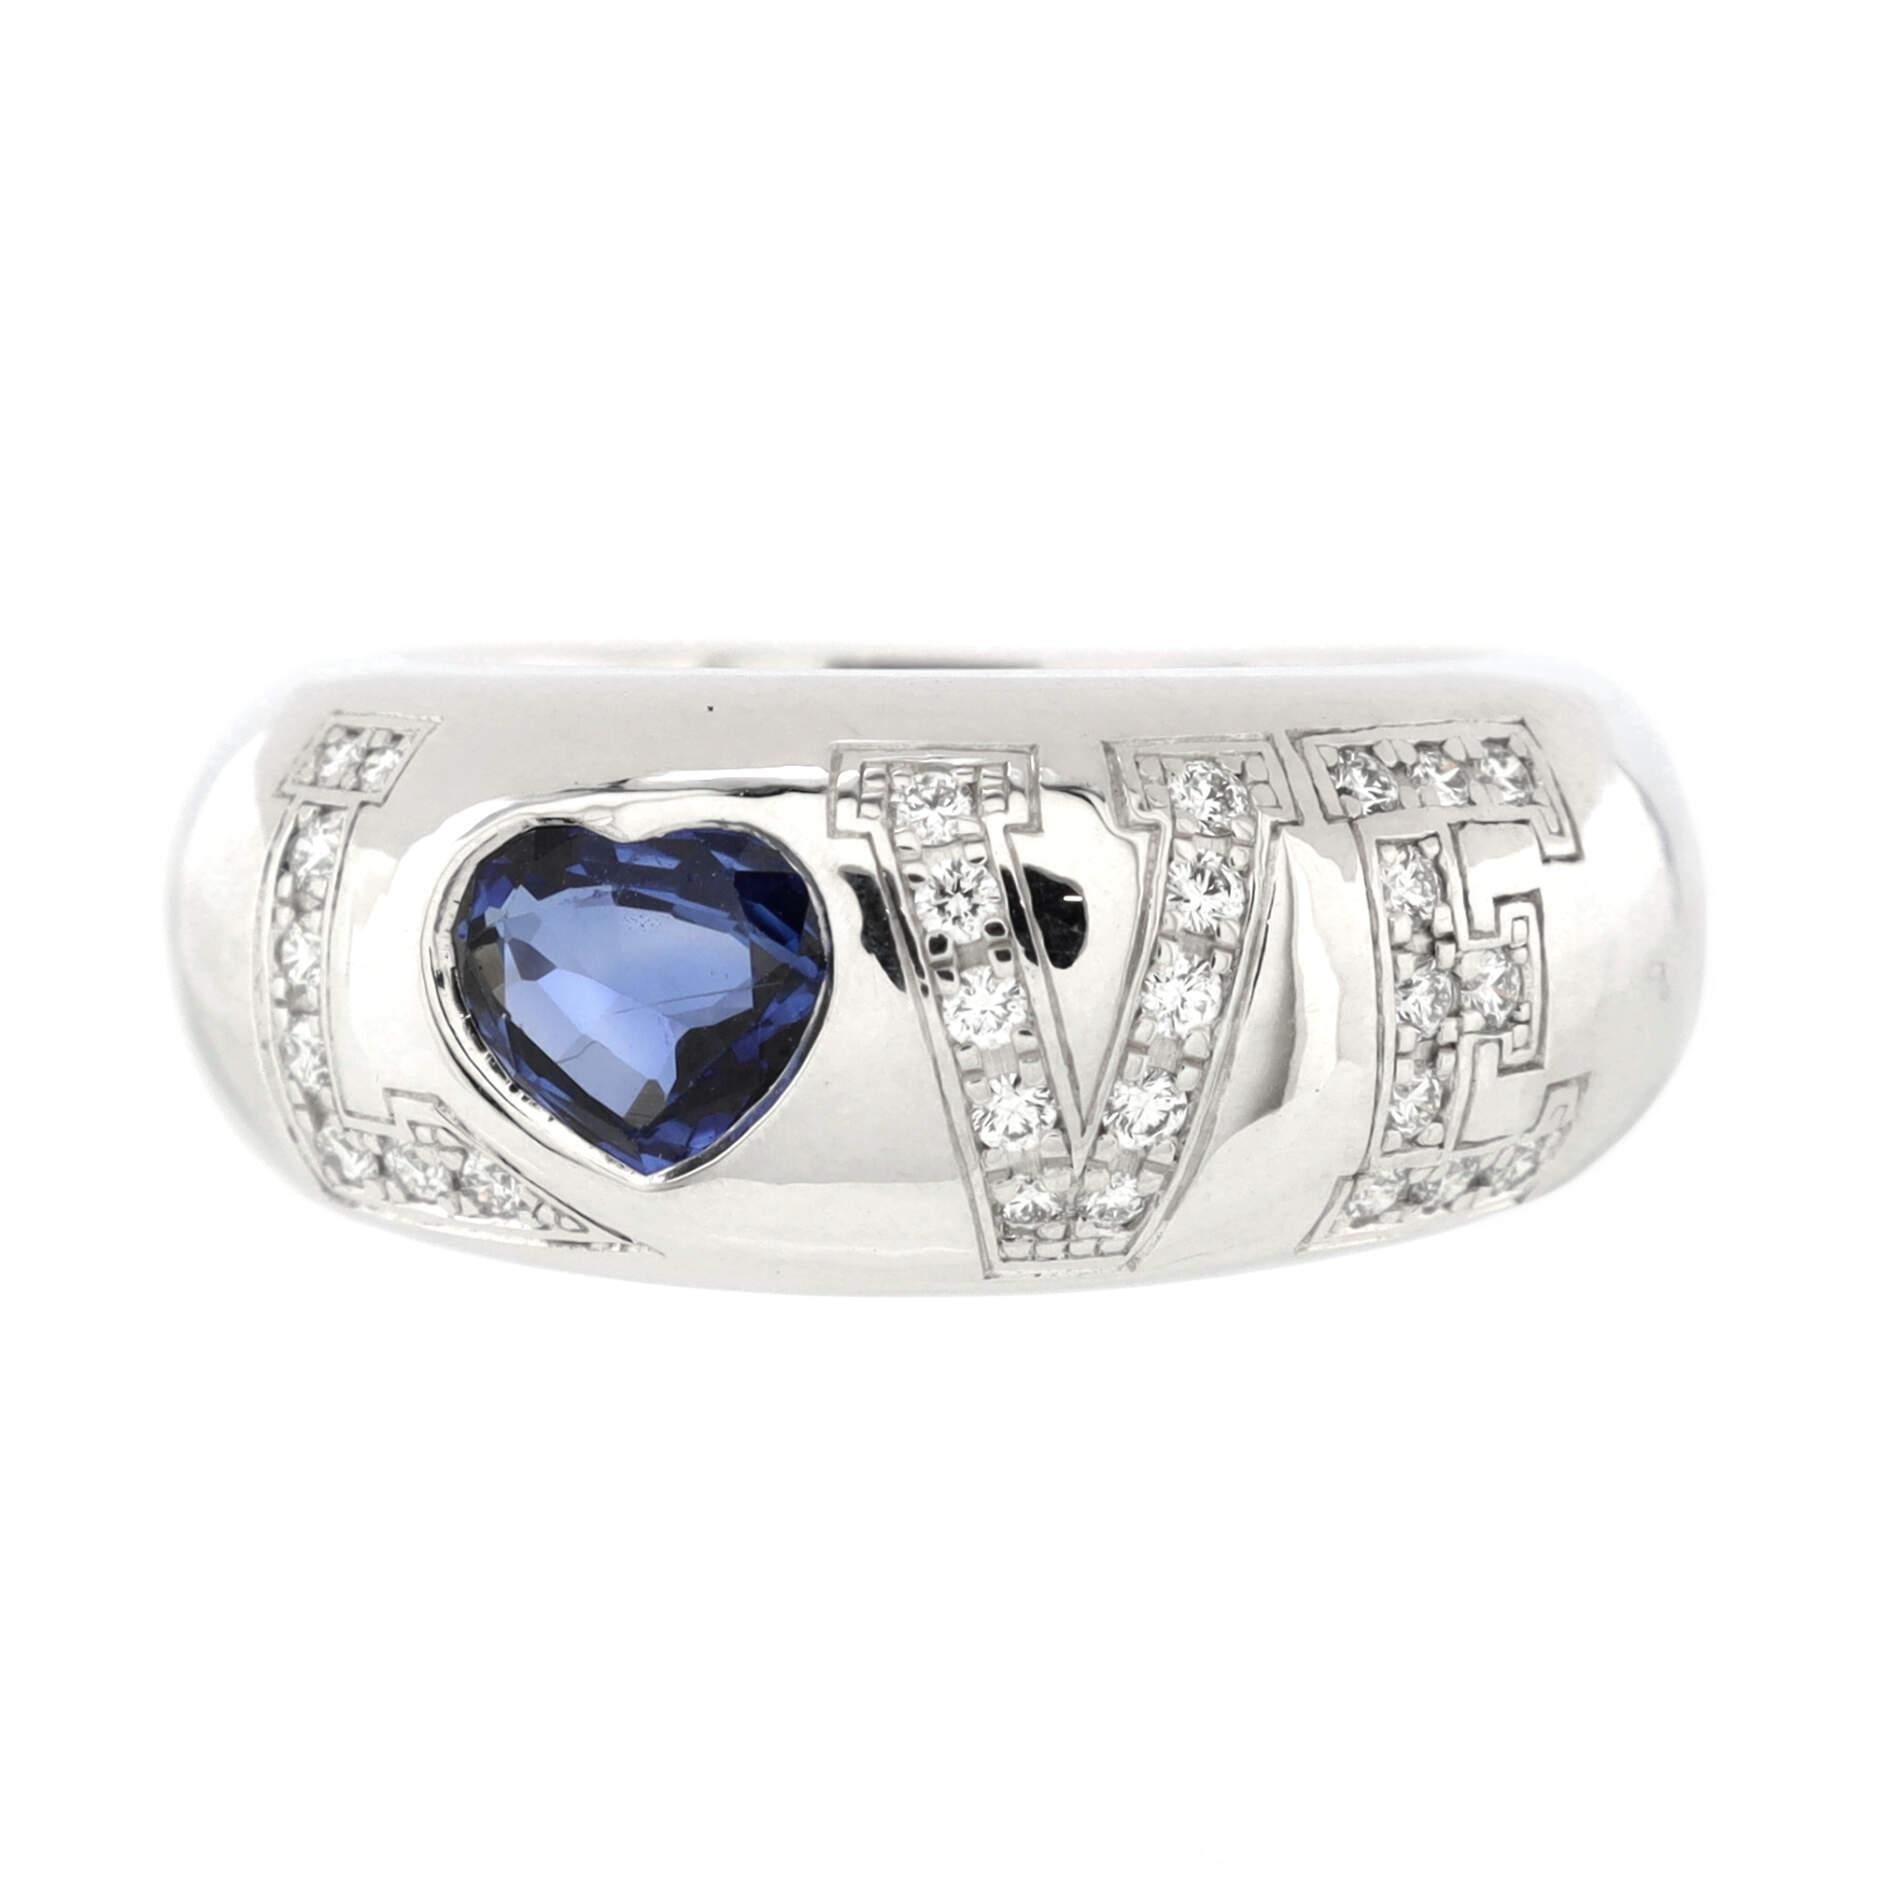 Condition: Very good. Moderate wear throughout.
Accessories: No Accessories
Measurements: Size: 5.5, Width: 5.45 mm
Designer: Chopard
Model: Love Ring 18K White Gold with Blue Sapphire and Diamonds
Exterior Color: White Gold
Item Number: 221769/446